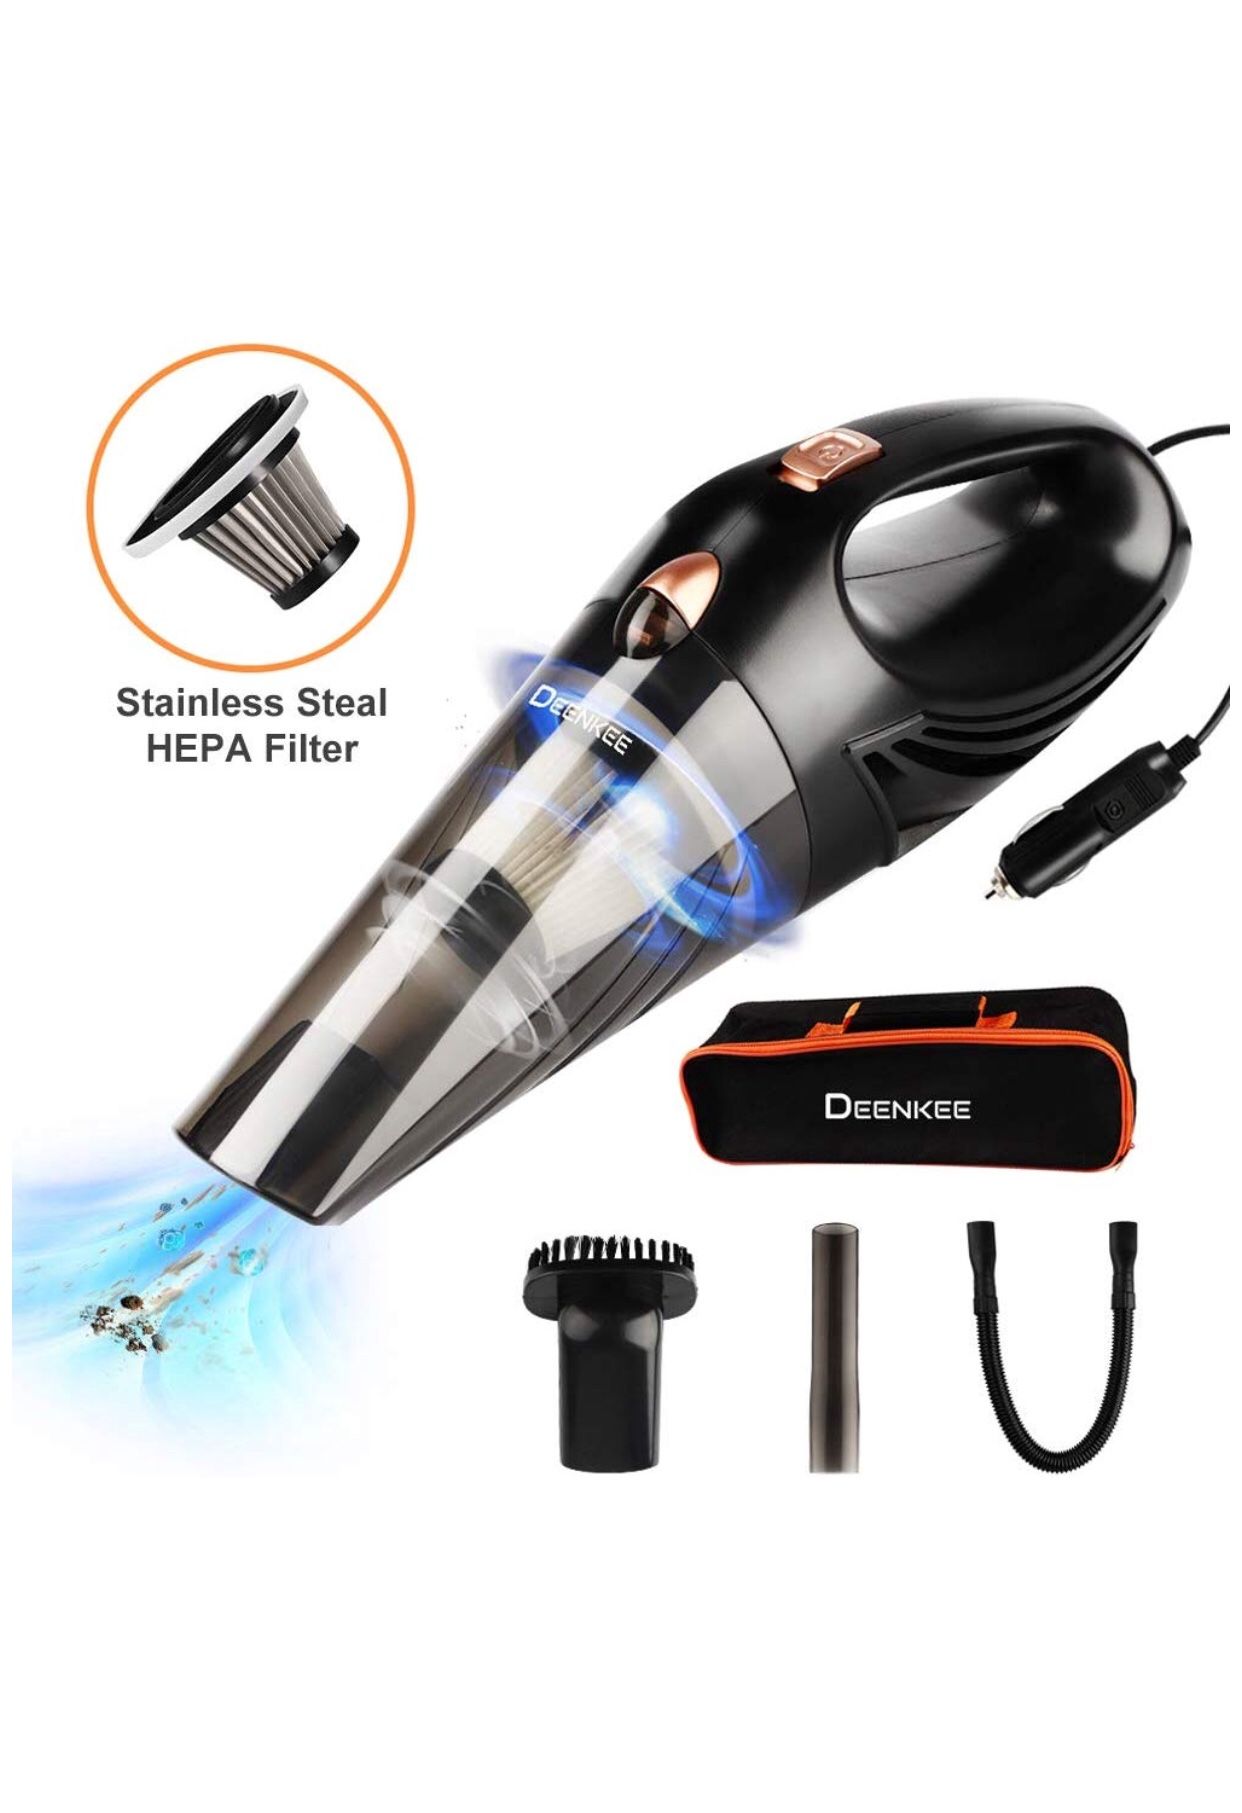 Car Vacuum, Handheld Vacuum for Car DC 12V, Stronger Suction, 5M Long Corded Portable Wet Dry Car Vacuum Cleaner High Power with Multiple Accessories